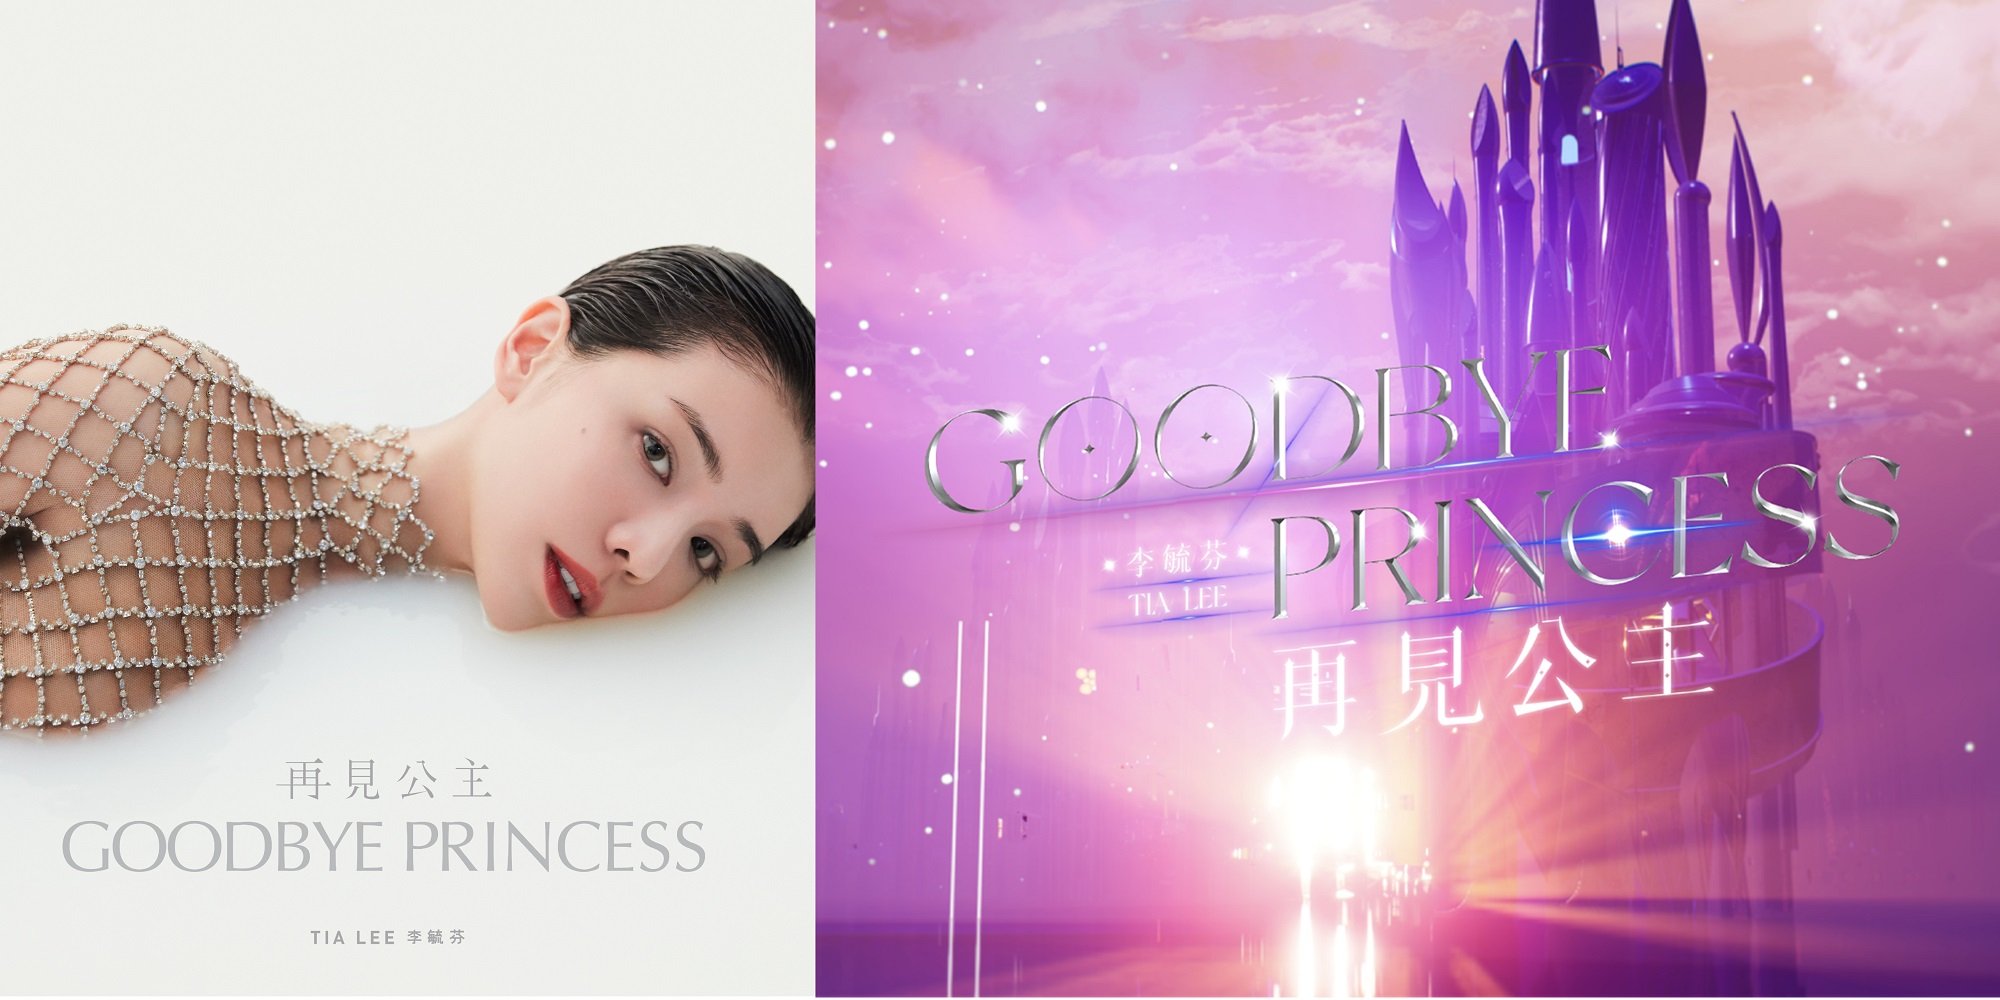 A joined photo of Tia Lee and the music video banner for 'Goodbye Princess'